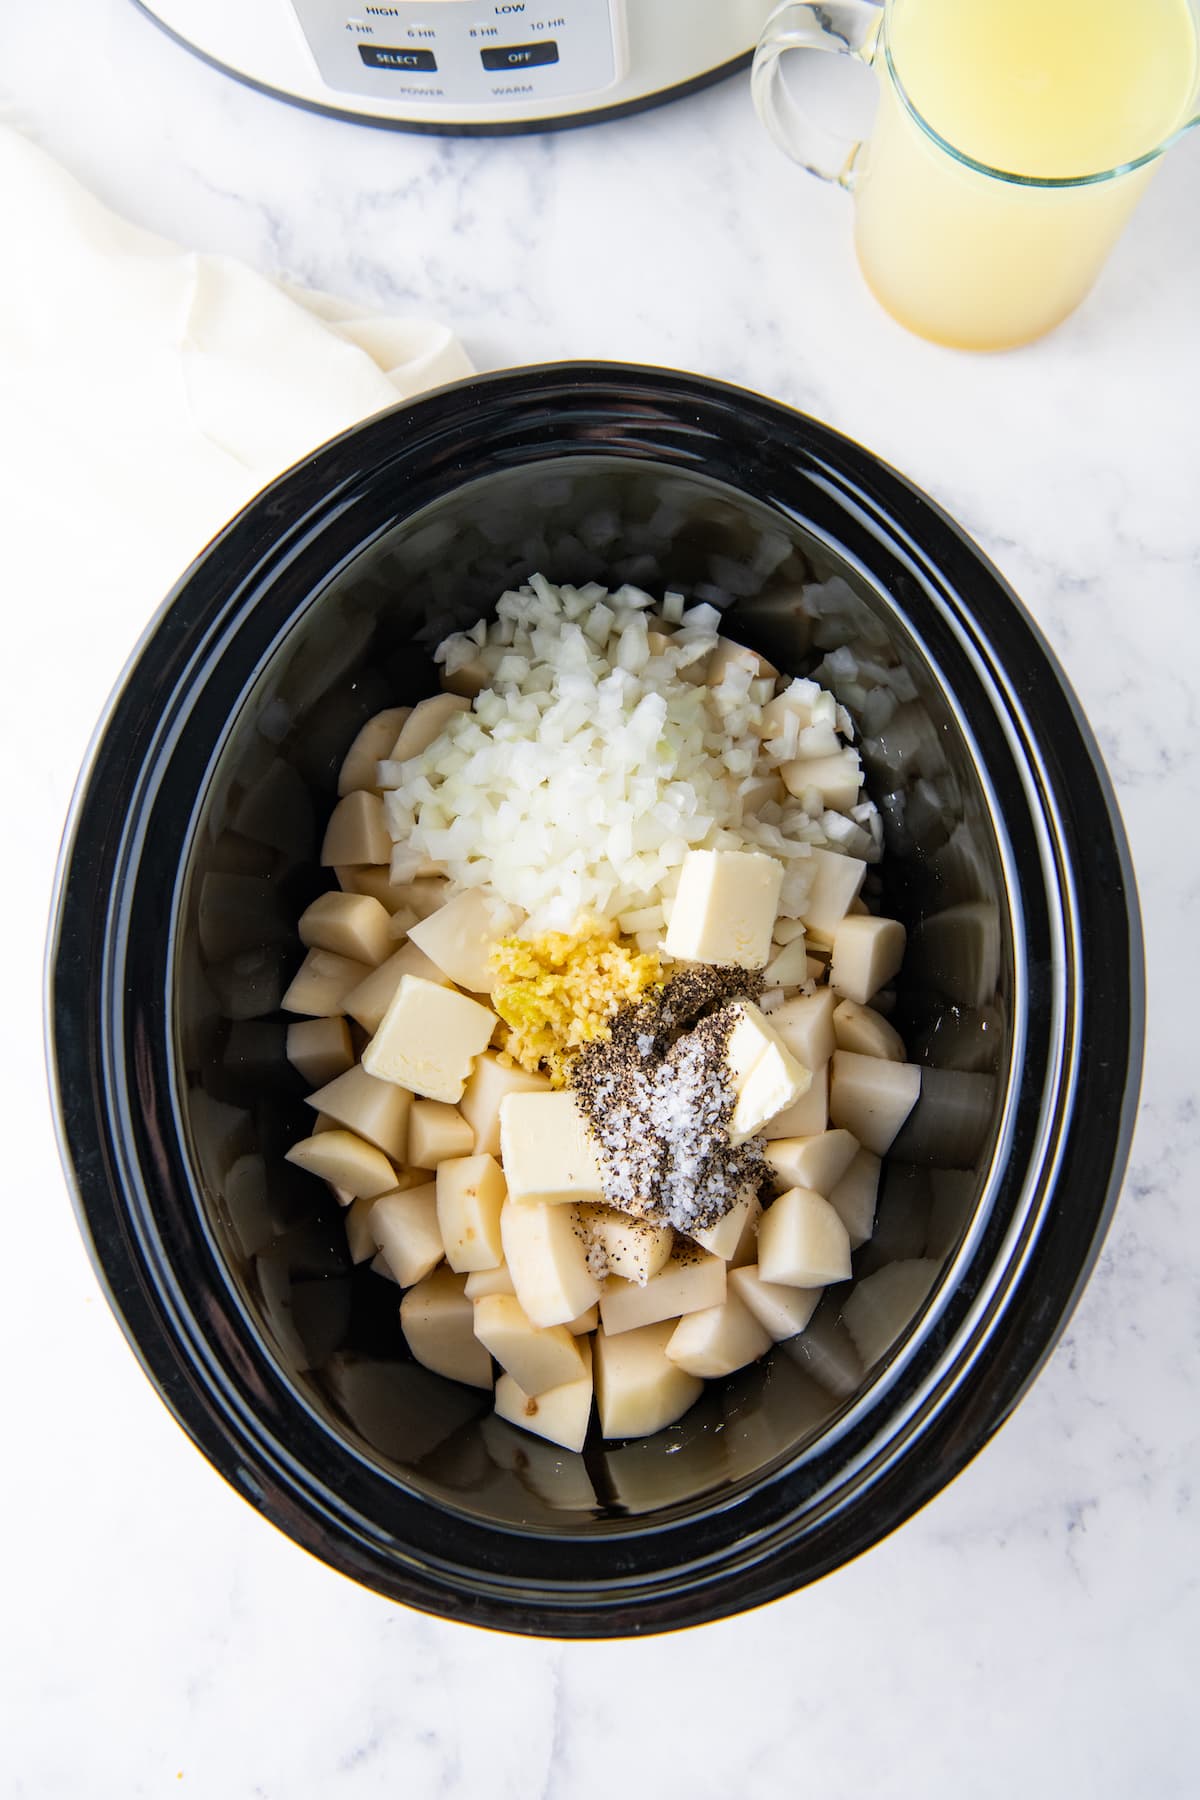 a crockpot with potatoes, onions, butter, and seasonings